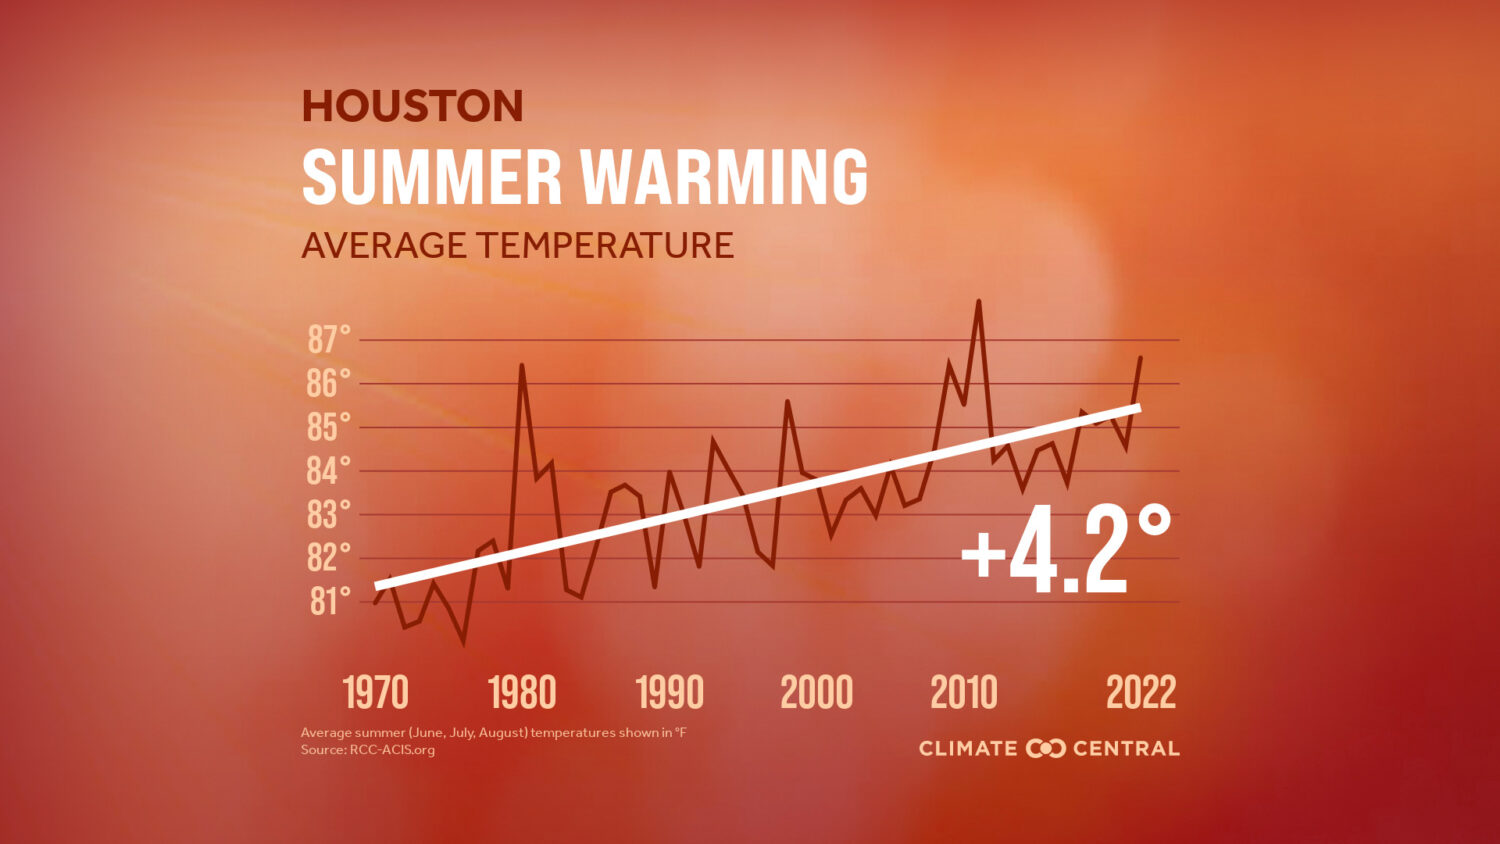 Houston summers are getting hotter and more extreme, data shows